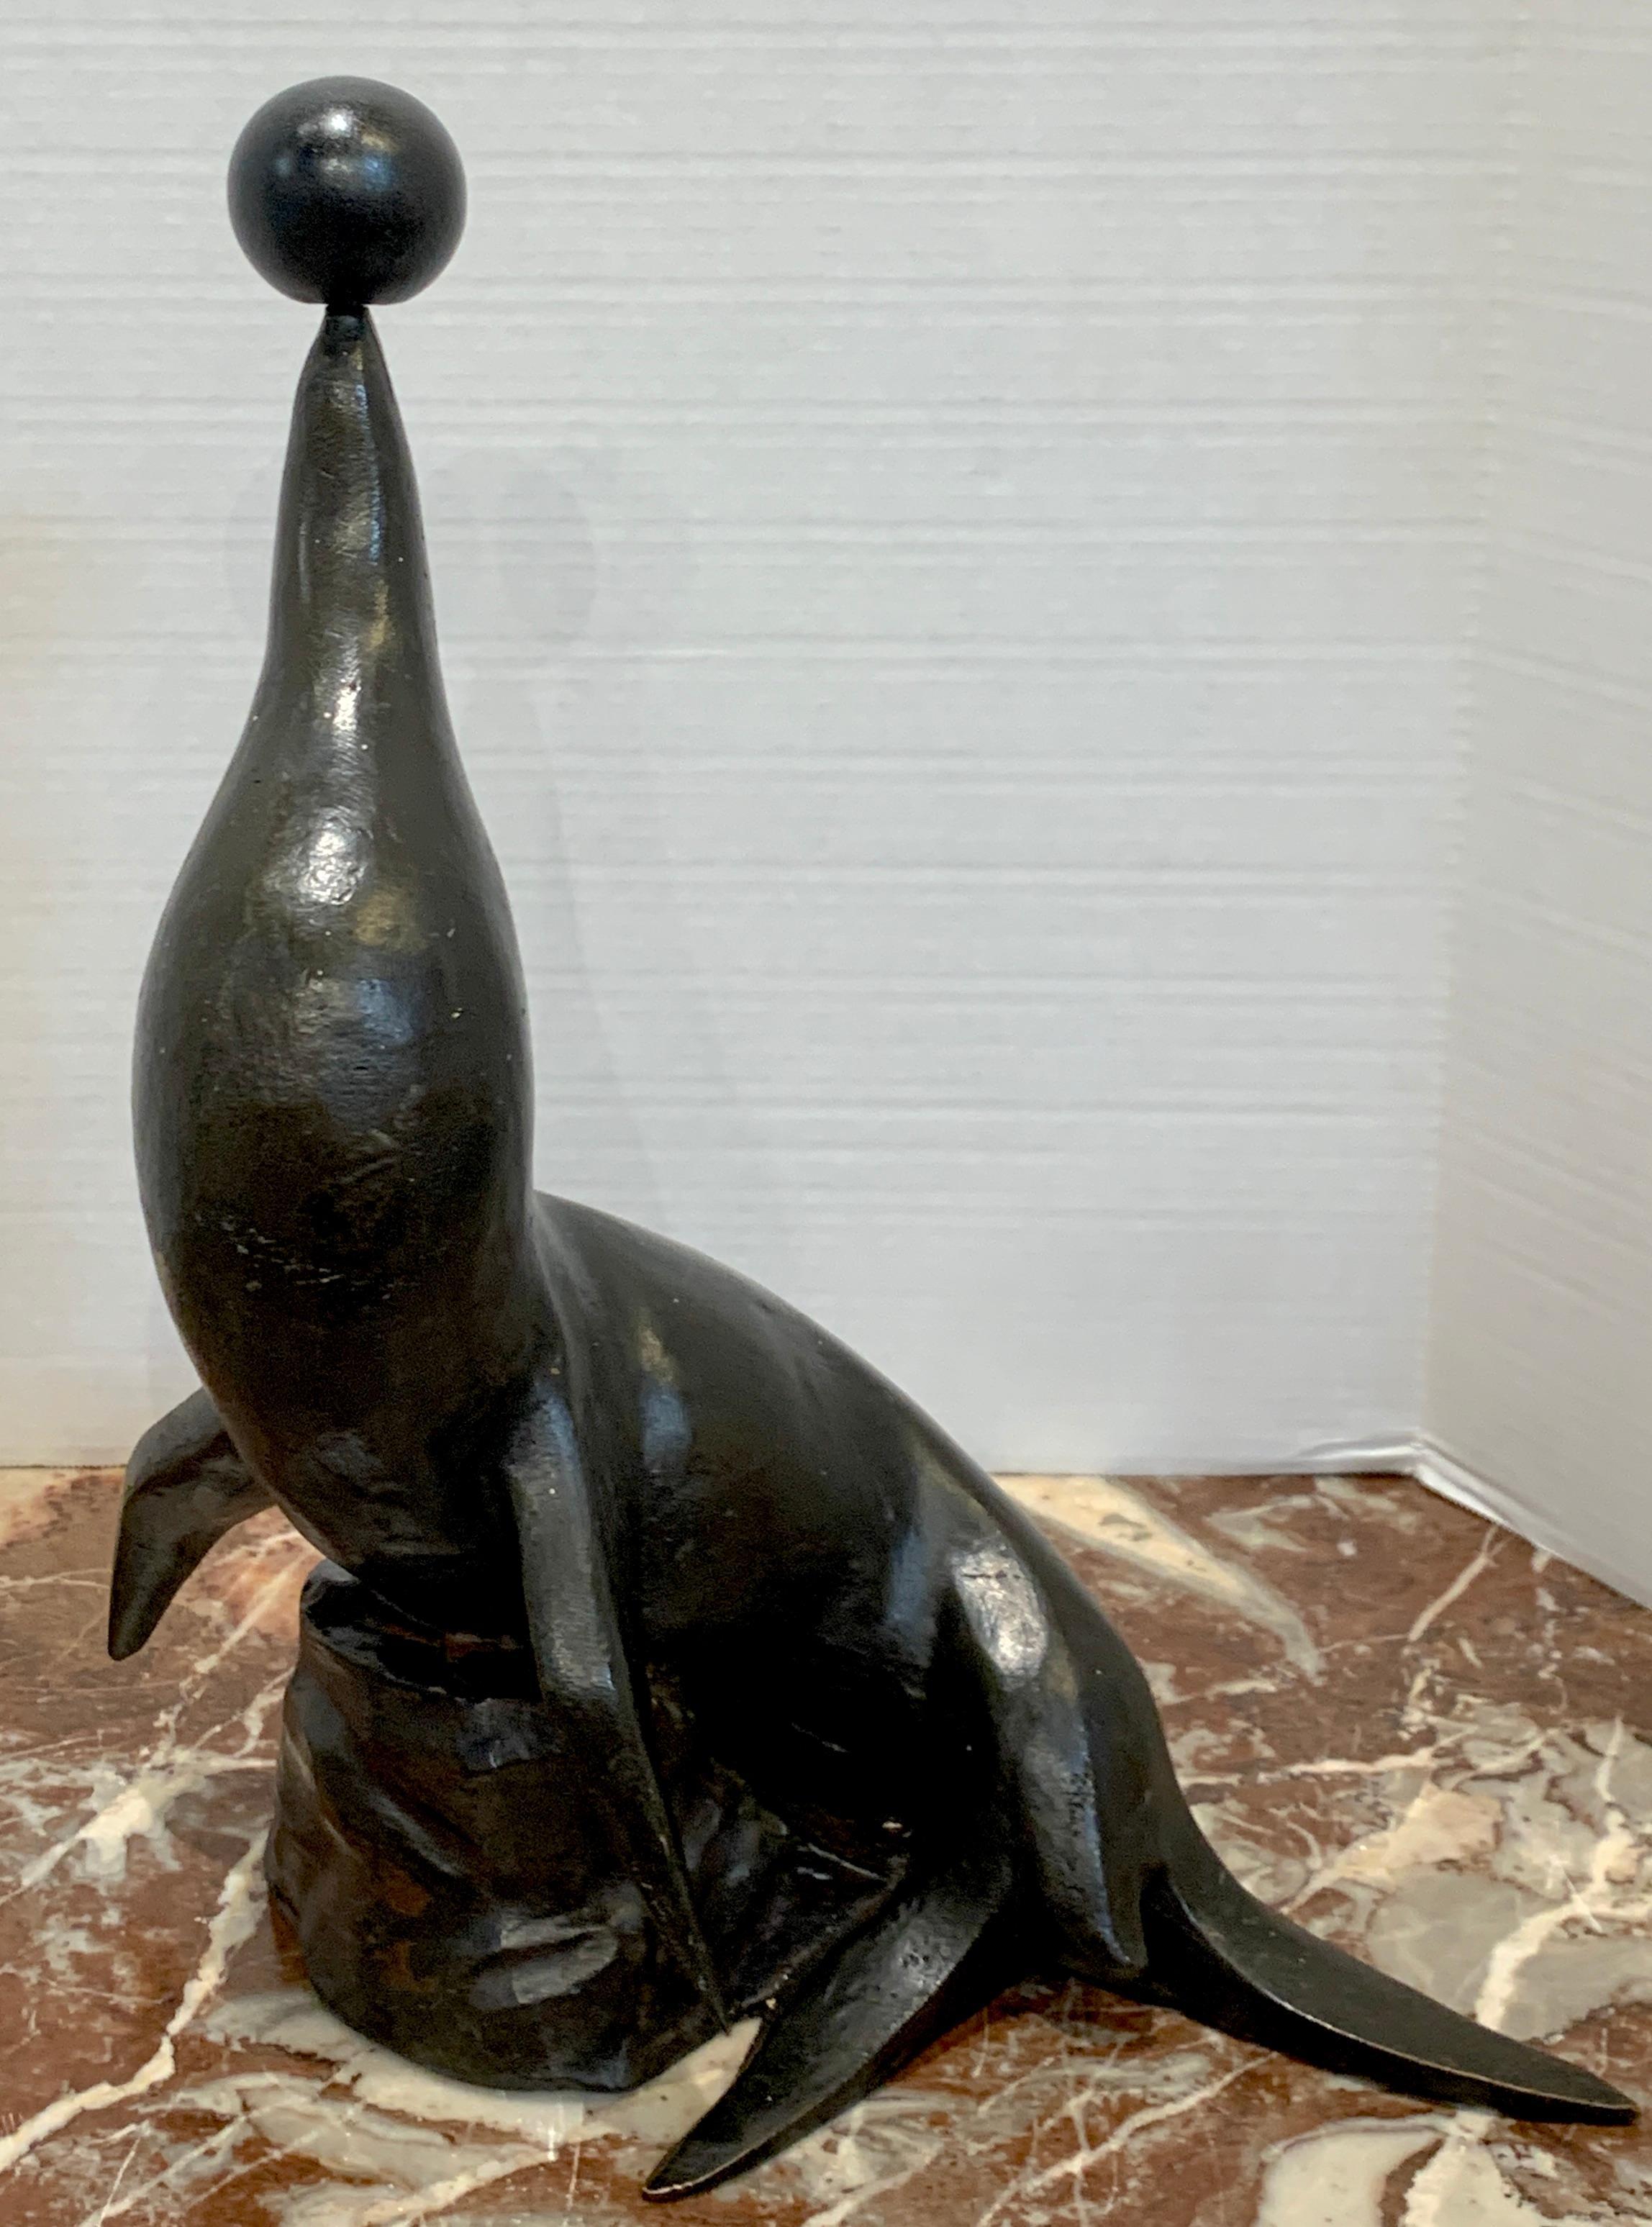 Seal, 1930 by Rueben Nakian
Reuben Nakian, American, (1897–1986)
A fine example with associated ball Signed 'Nakian' and Copyrighted, 
Another example of this sculpture is in Whitney Museum of American Art, gifted by Gertrude Vanderbilt Whitney.